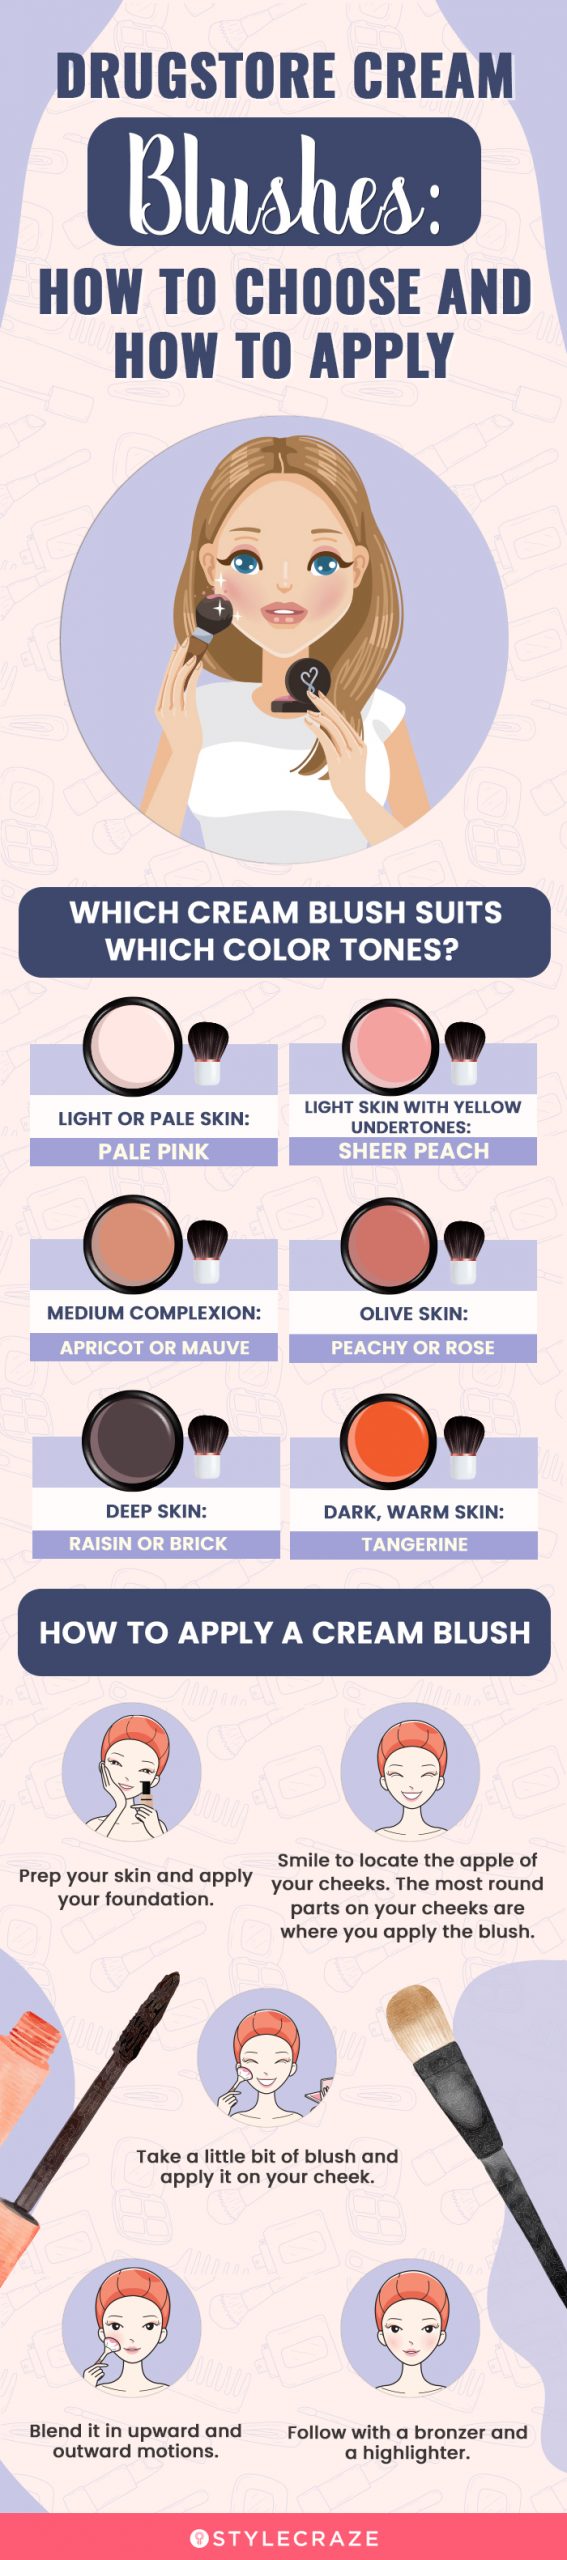 Drugstore Cream Blushes: How To Choose & How To Apply (infographic)